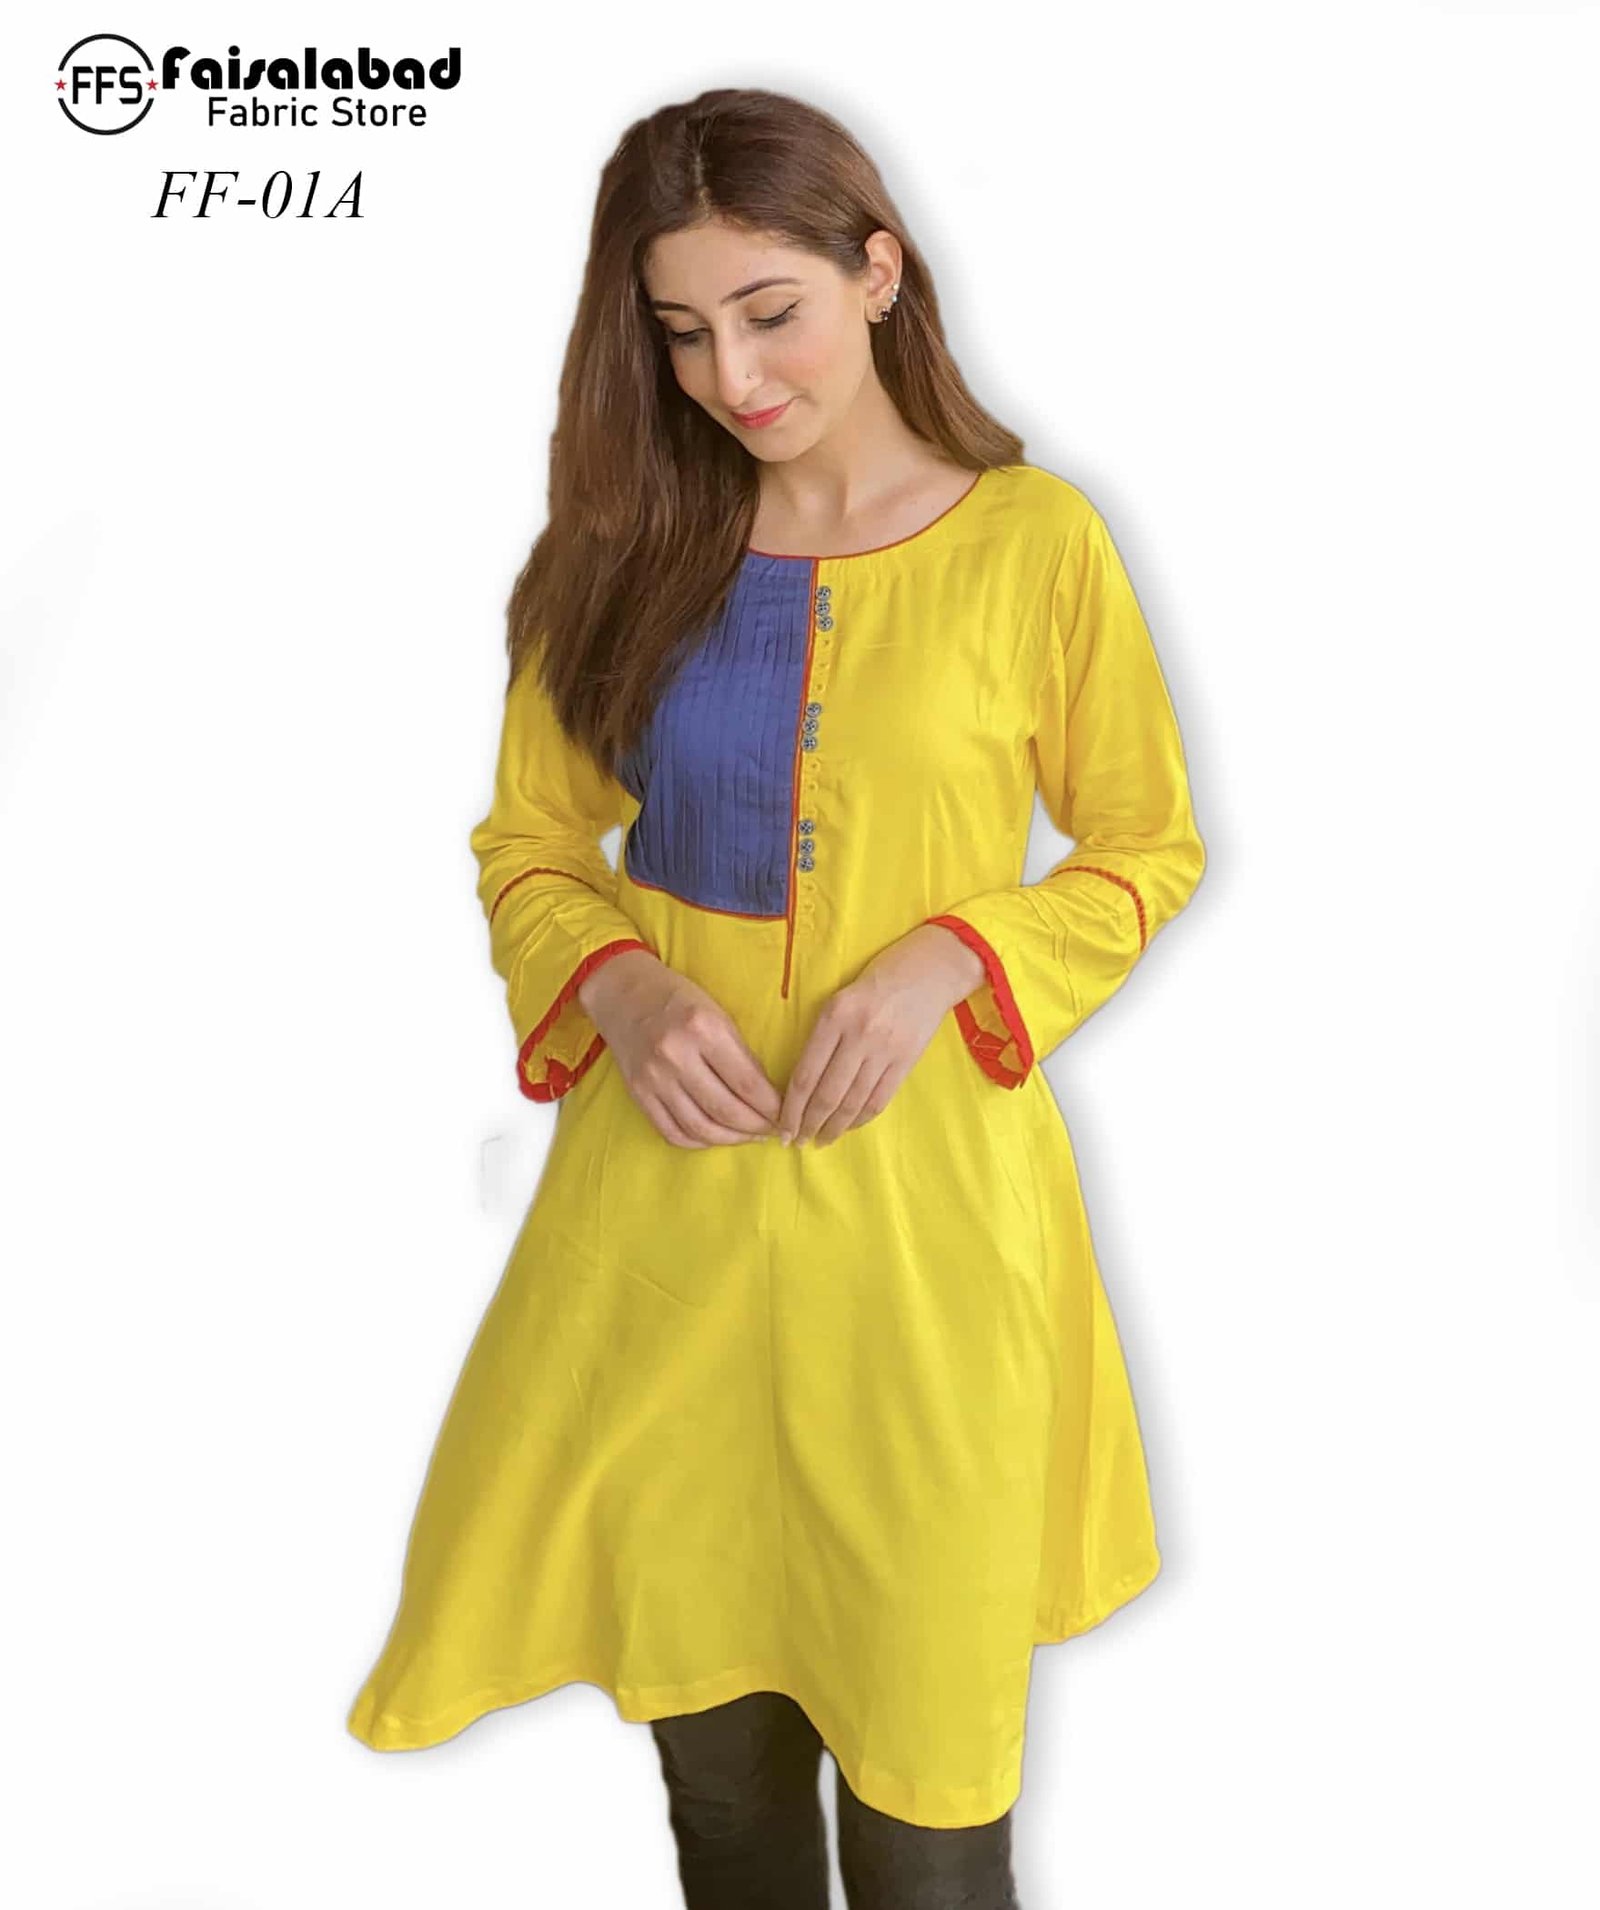 Buy the most modern design of stitched Kurtis in the best price range both  in retail & wholesale: LPK-14